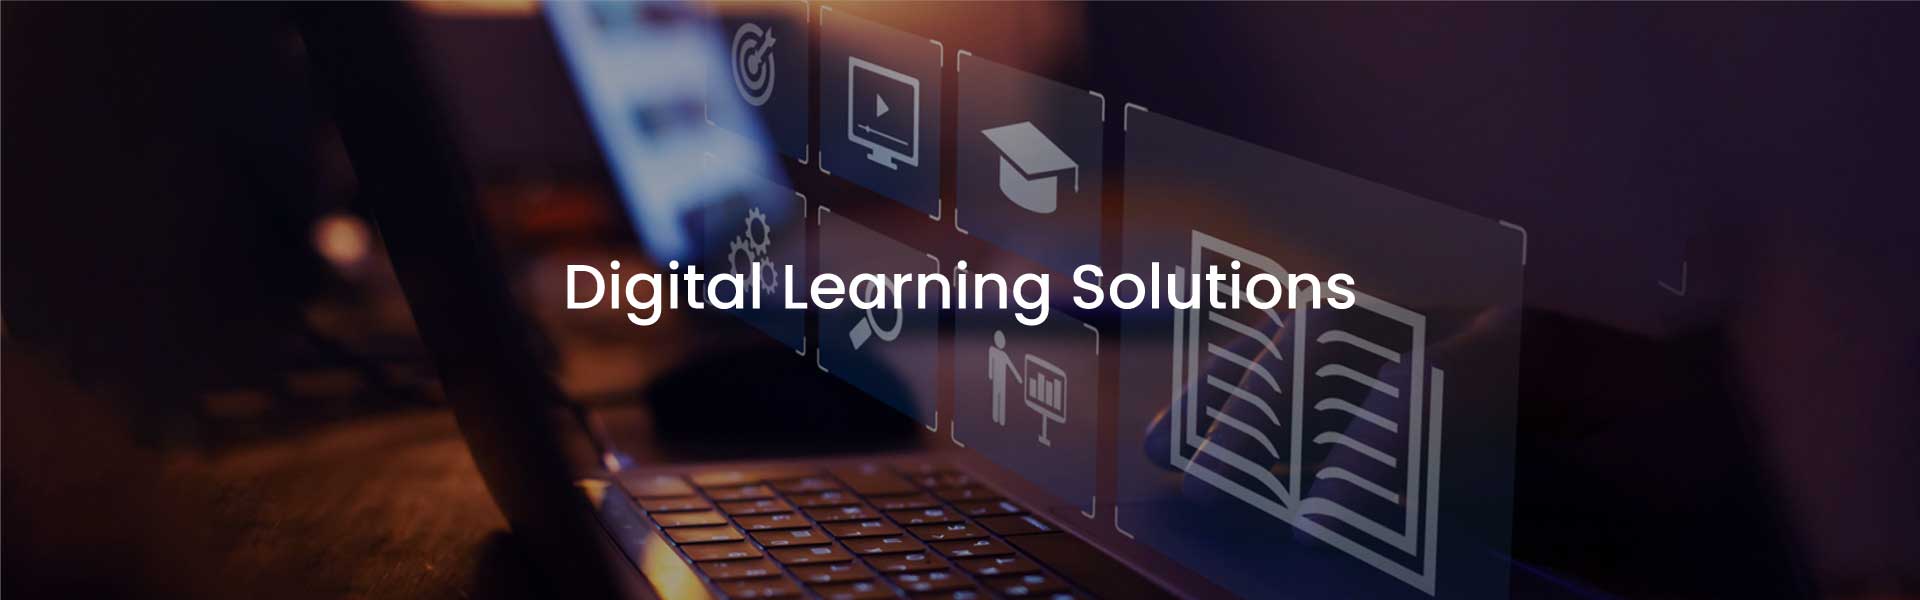 Digital Learning Content Services